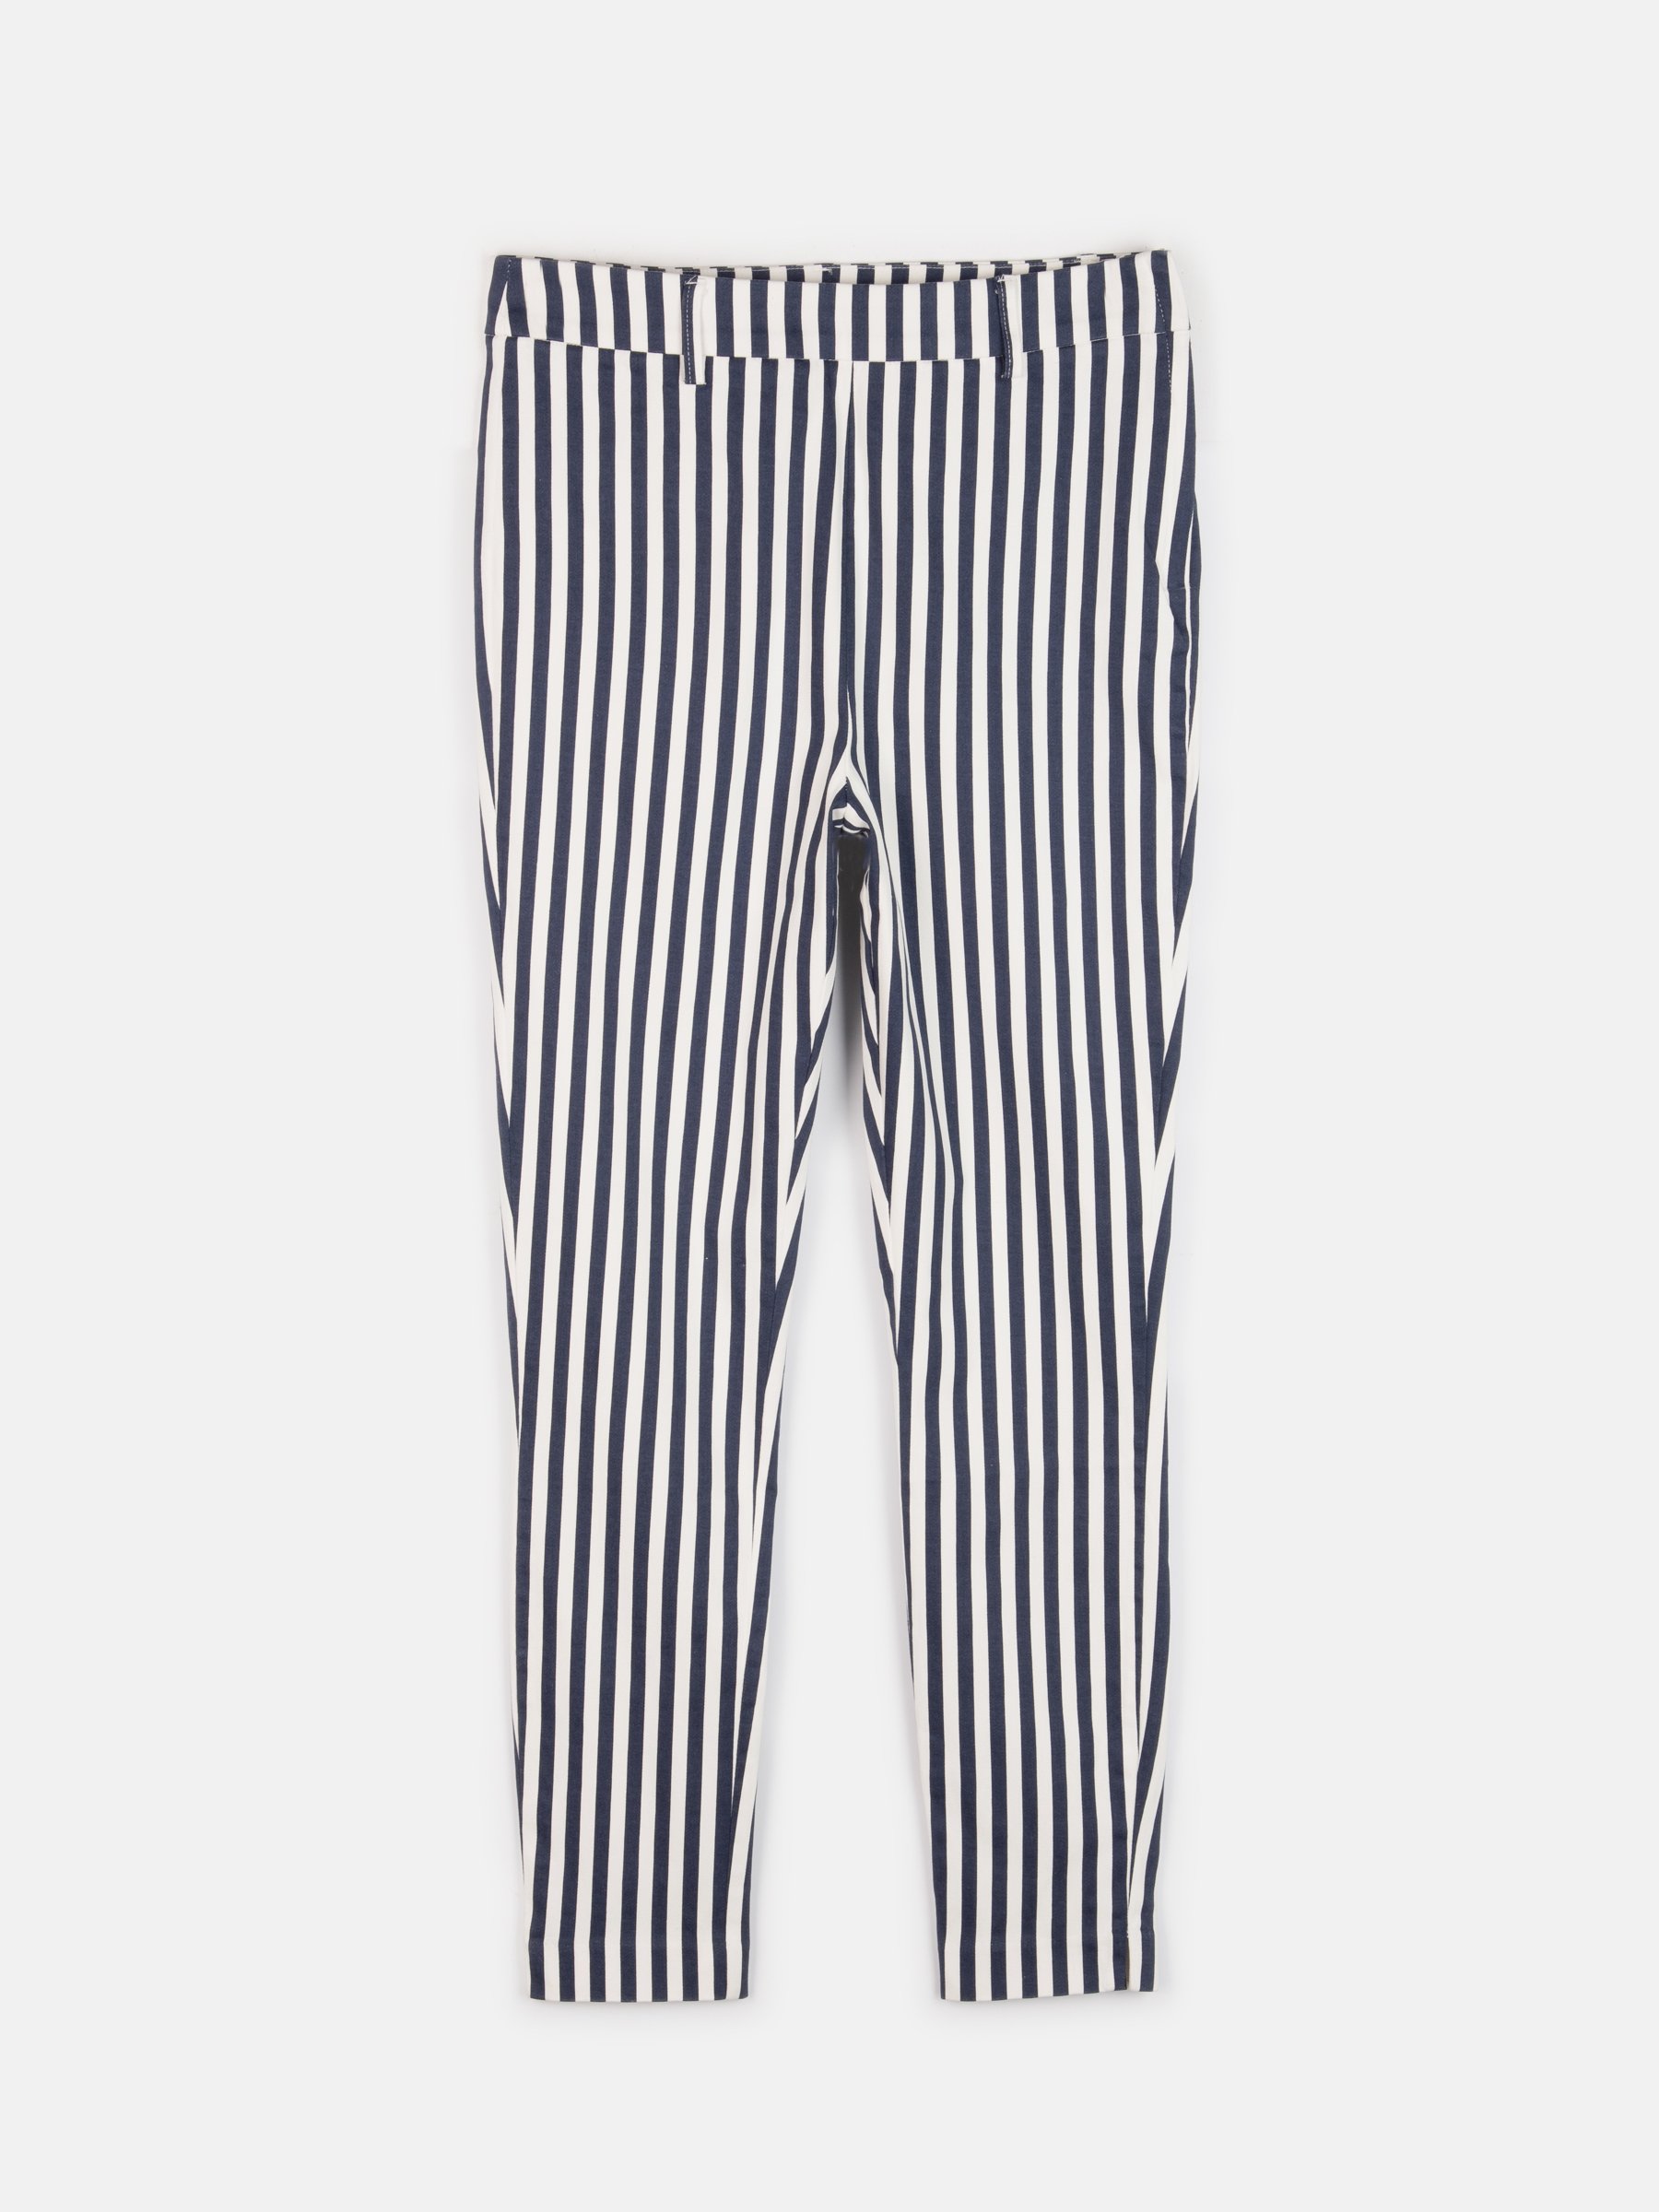 Céline Striped Trousers 608  liked on Polyvore featuring pants michael  kors pant  Black and white striped pants Trendy street style Elastic  waistband pants